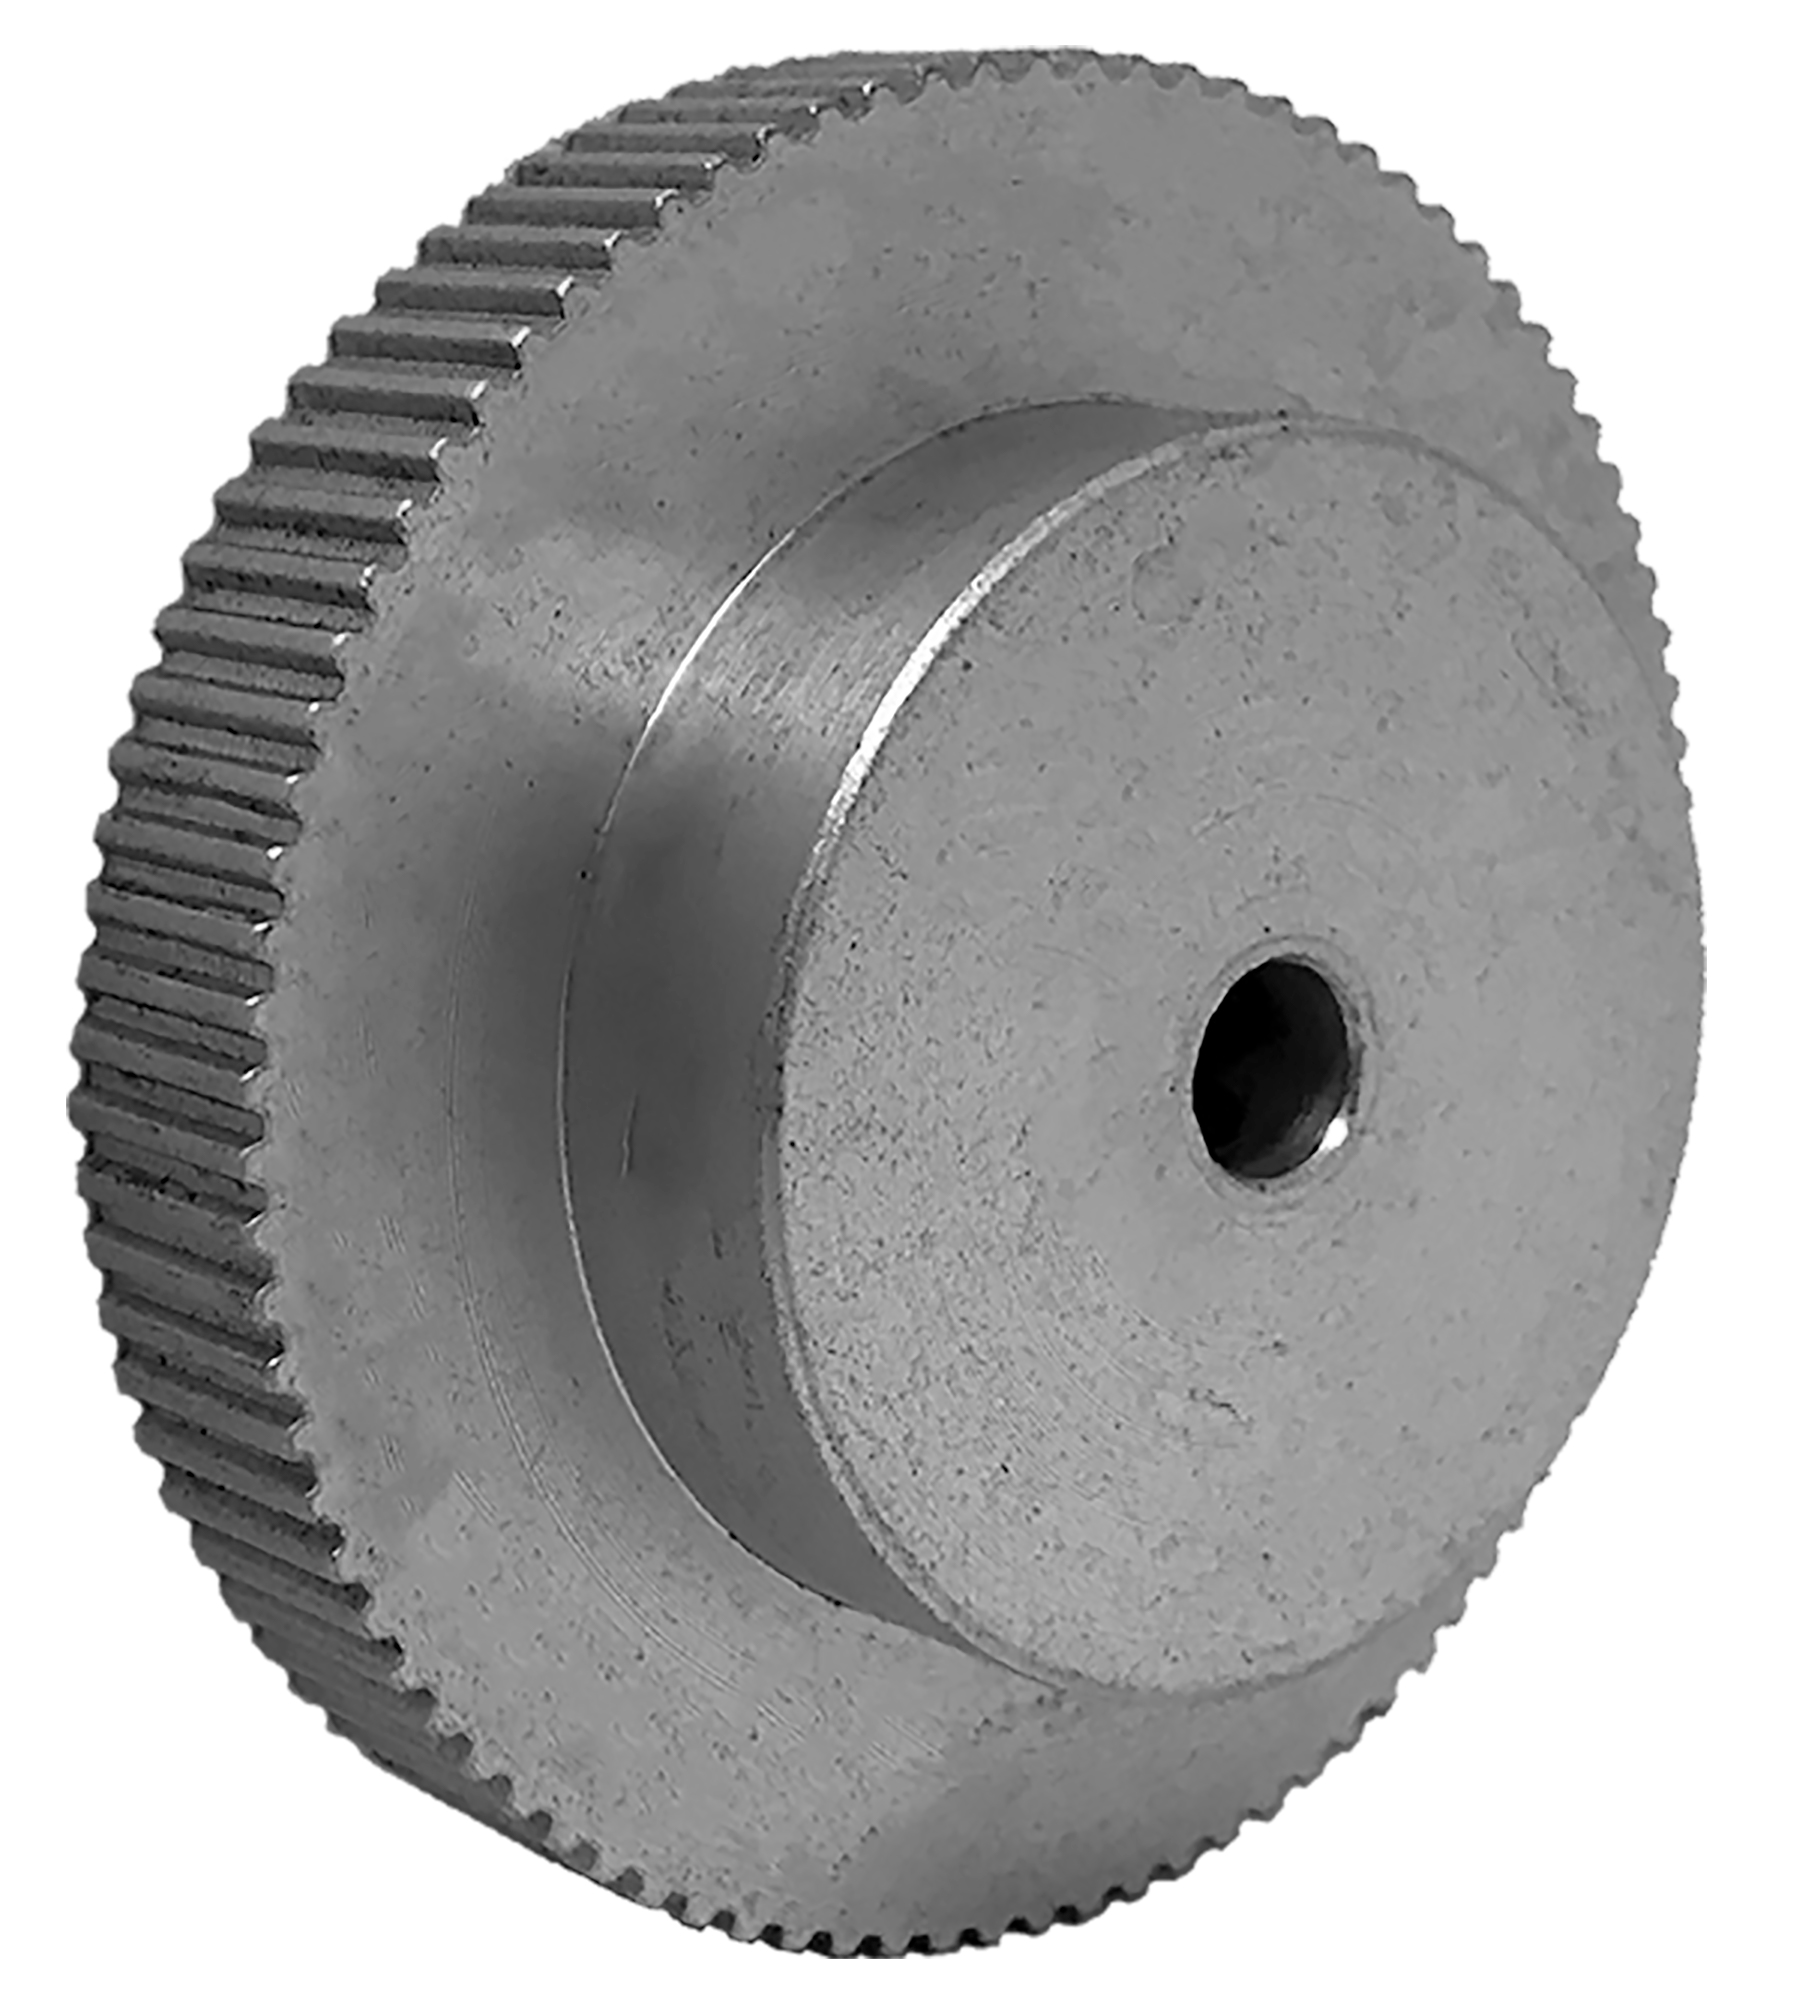 108LT187-6A5 - Aluminum Imperial Pitch Pulleys